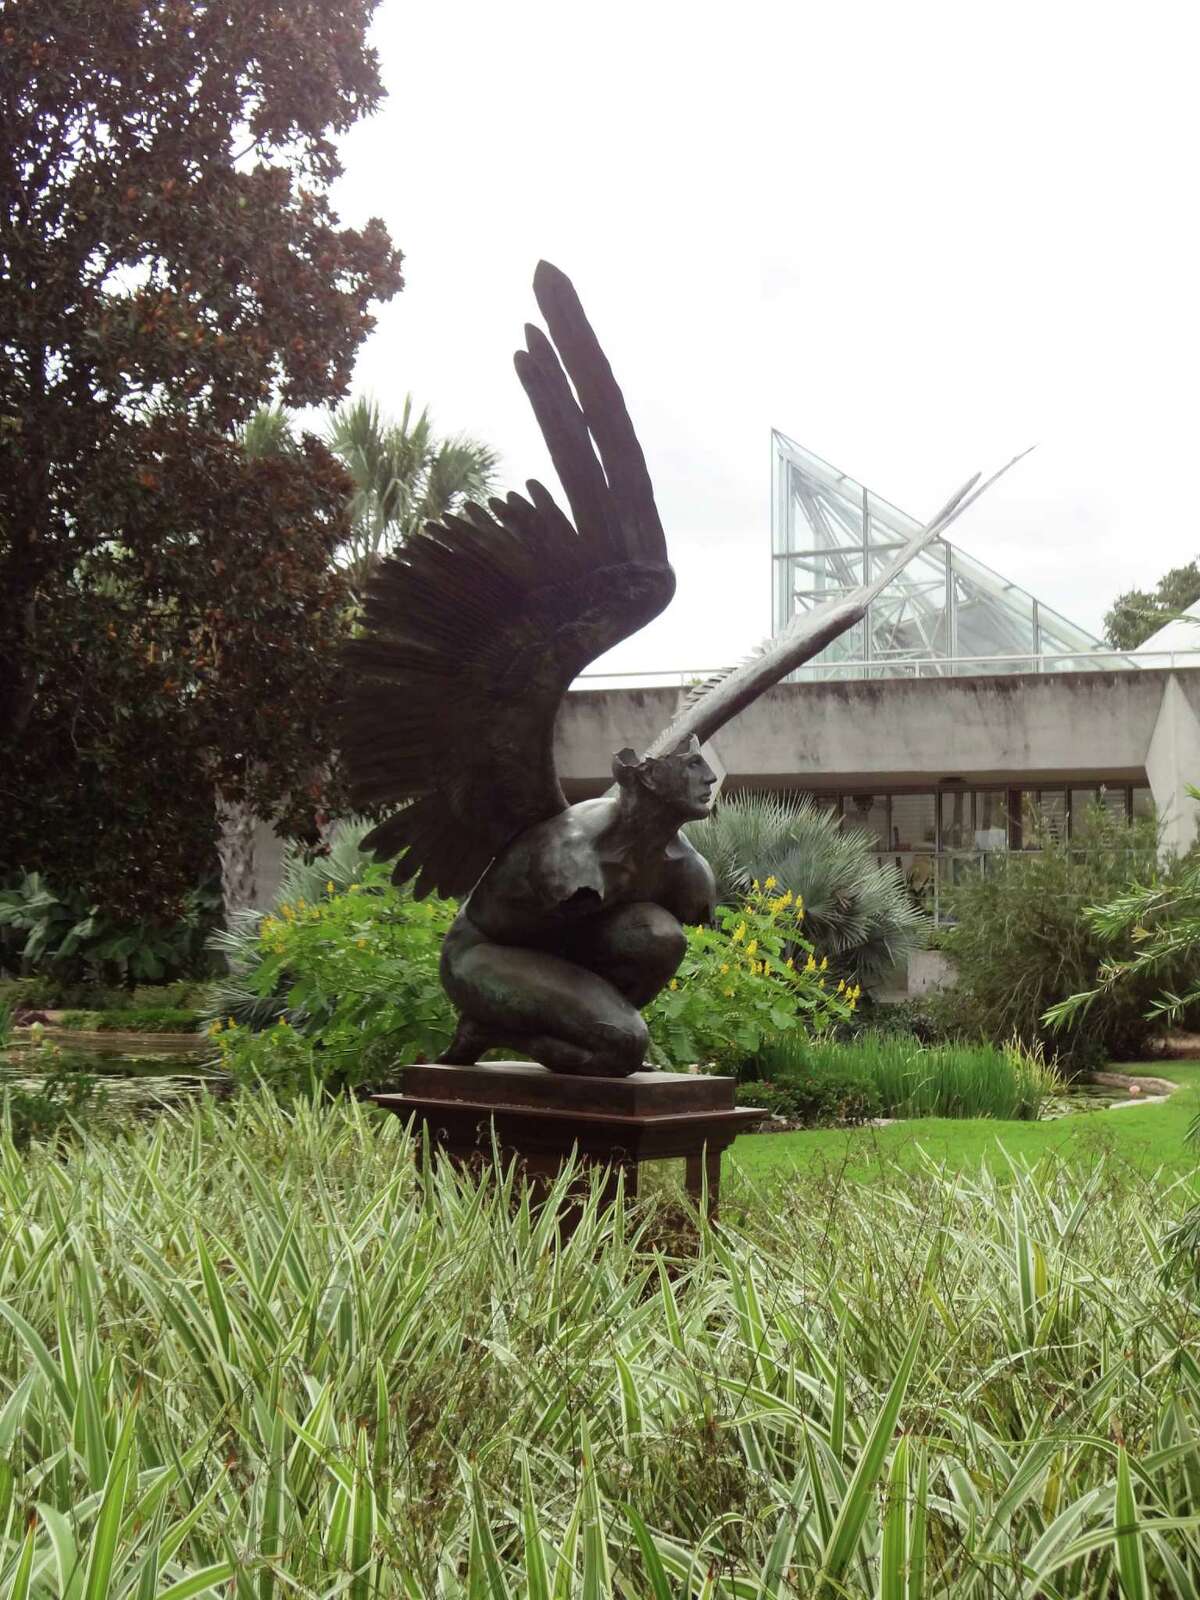 Mexican artist Jorge Marín's "El Tiempo" is one of eight sculptures by the Mexican artist on view at the San Antonio Botanical Garden.